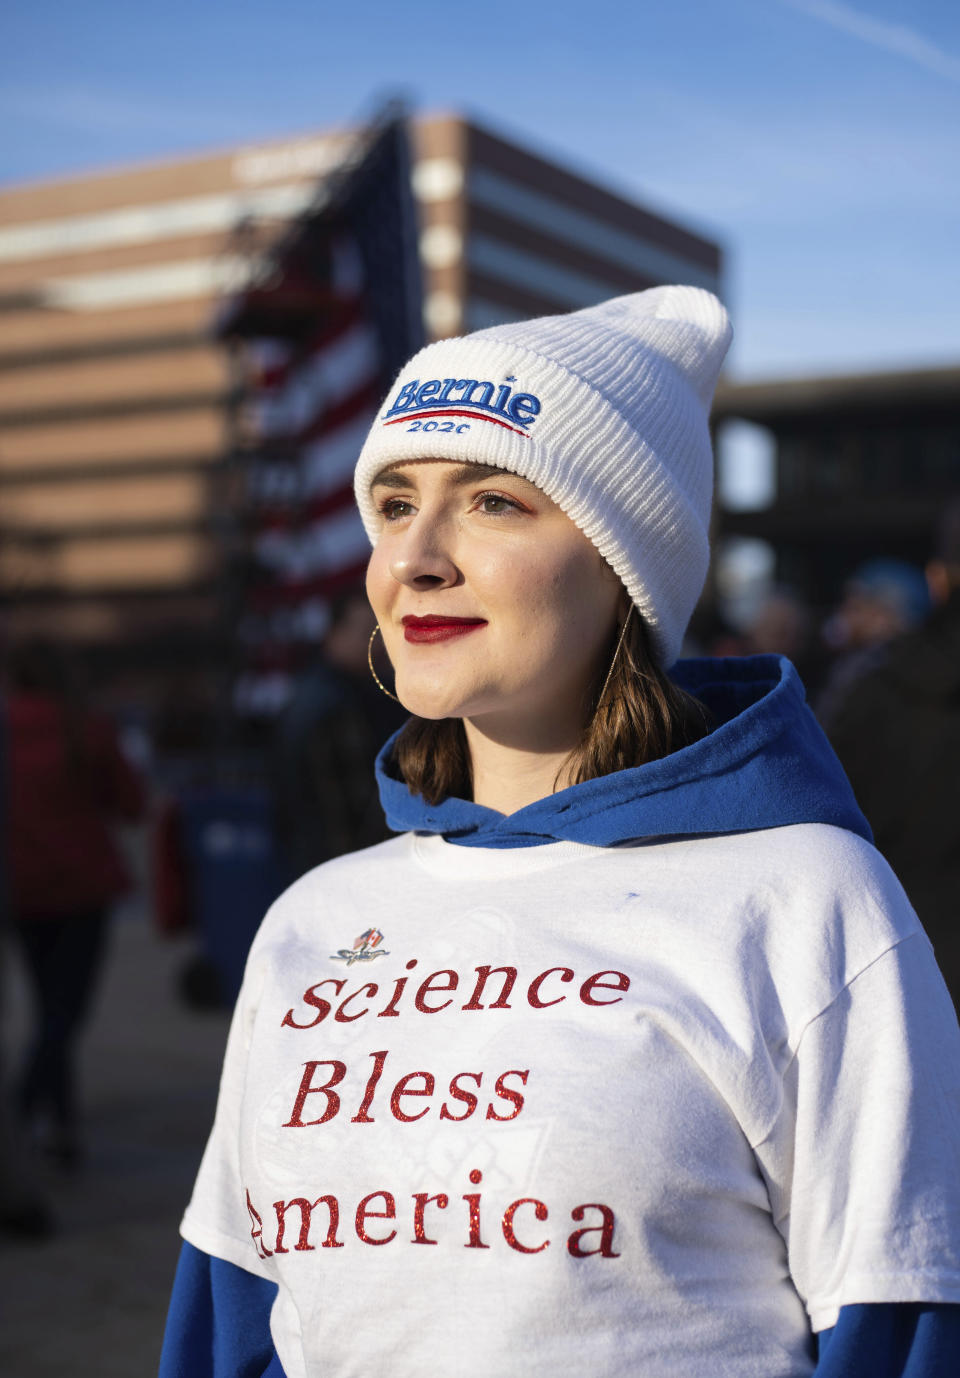 Alannah Garrett, 19, of Saginaw, poses for a photo at a rally for Bernie Sanders at Calder Plaza in Grand Rapids, Michigan on Sunday, March 8, 2020. Garrett said she is voting for Sanders for environmental reasons as well as for social justice issues. (Anntaninna Biondo/The Grand Rapids Press via AP)